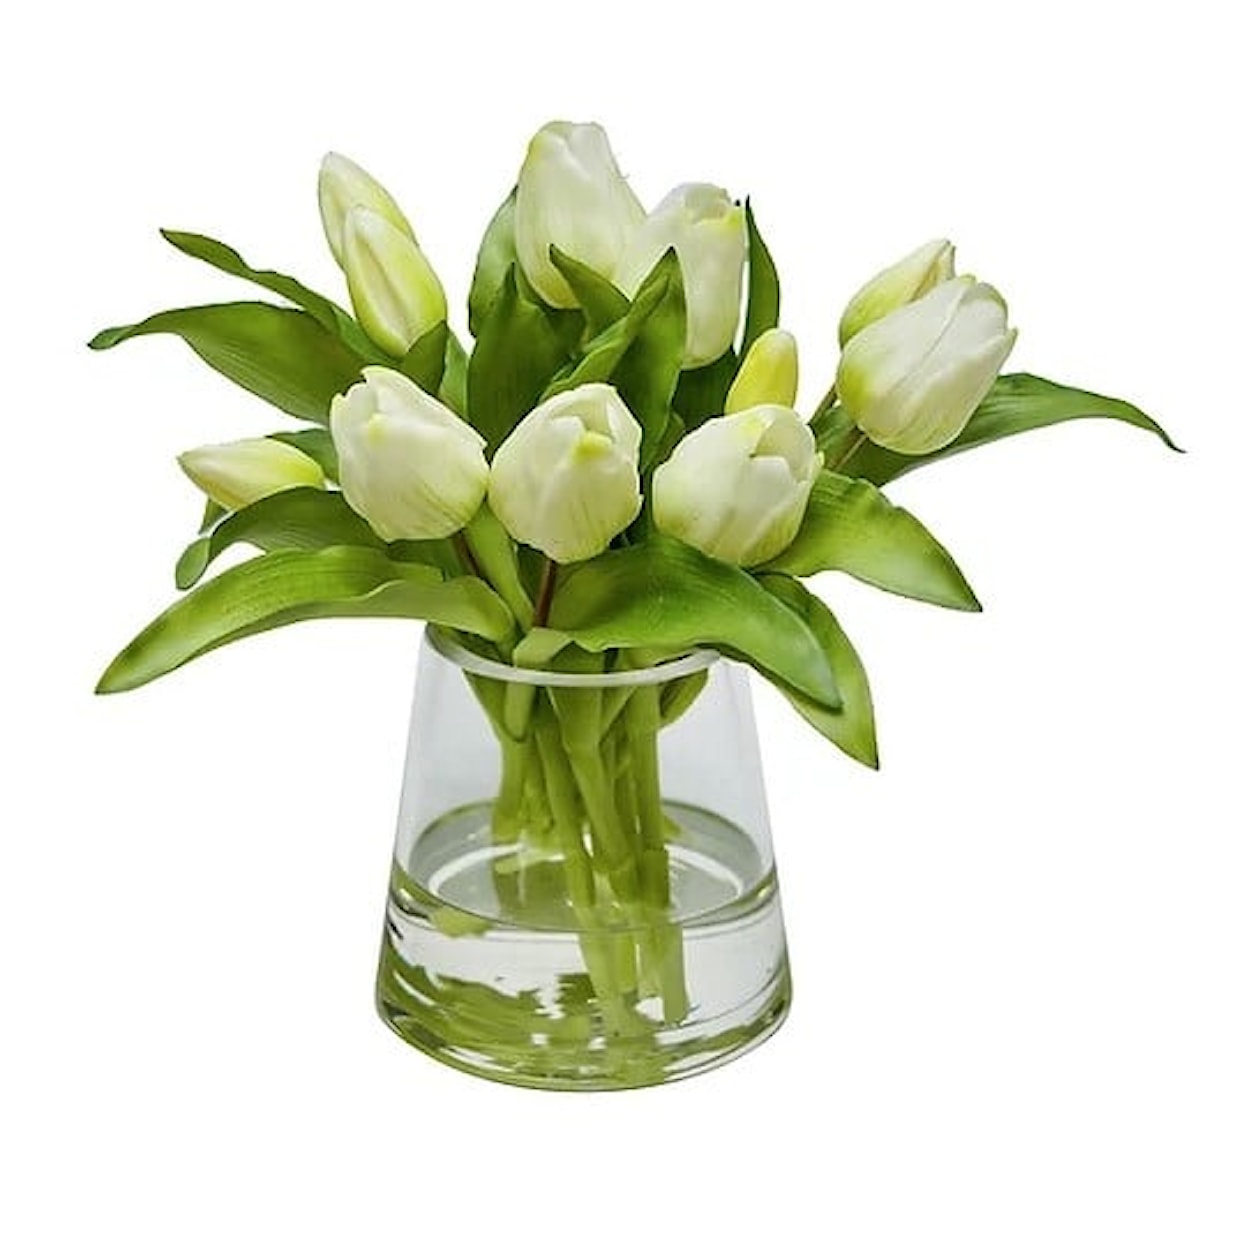 The Ivy Guild Florals White Tulips 5" Pyramid Glass 